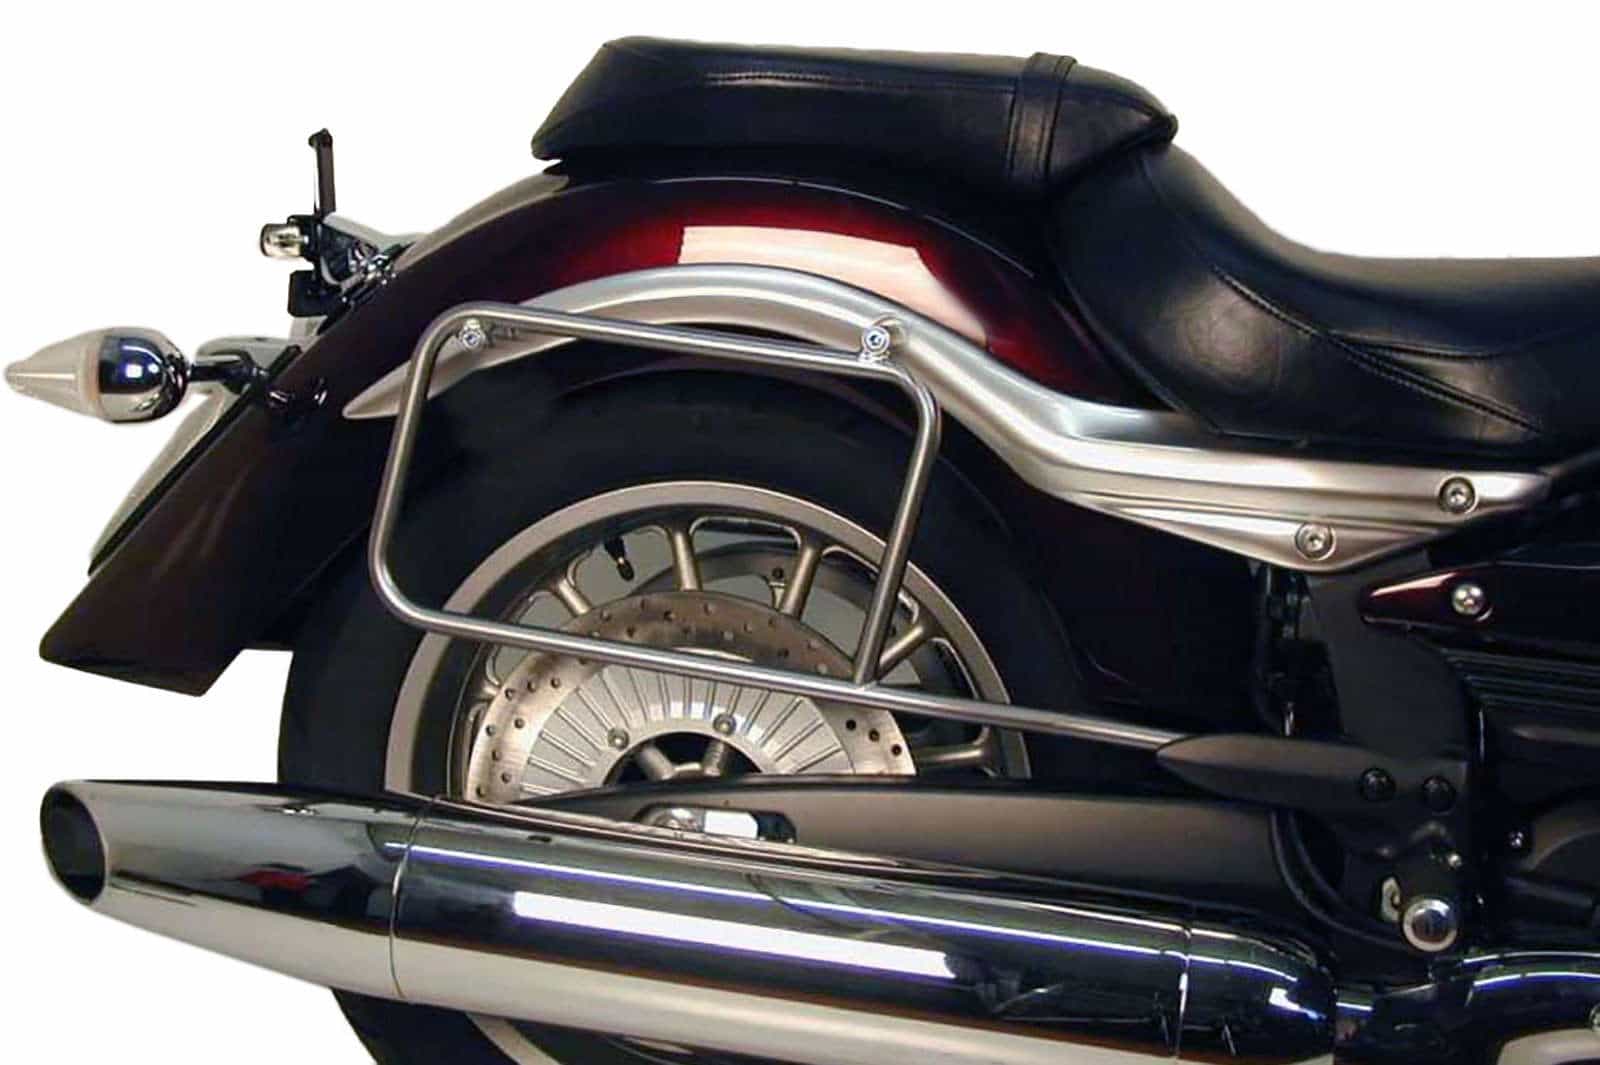 Sidecarrier permanent mounted chrome for Yamaha XV 1900 Midnight Star (2006-2016)